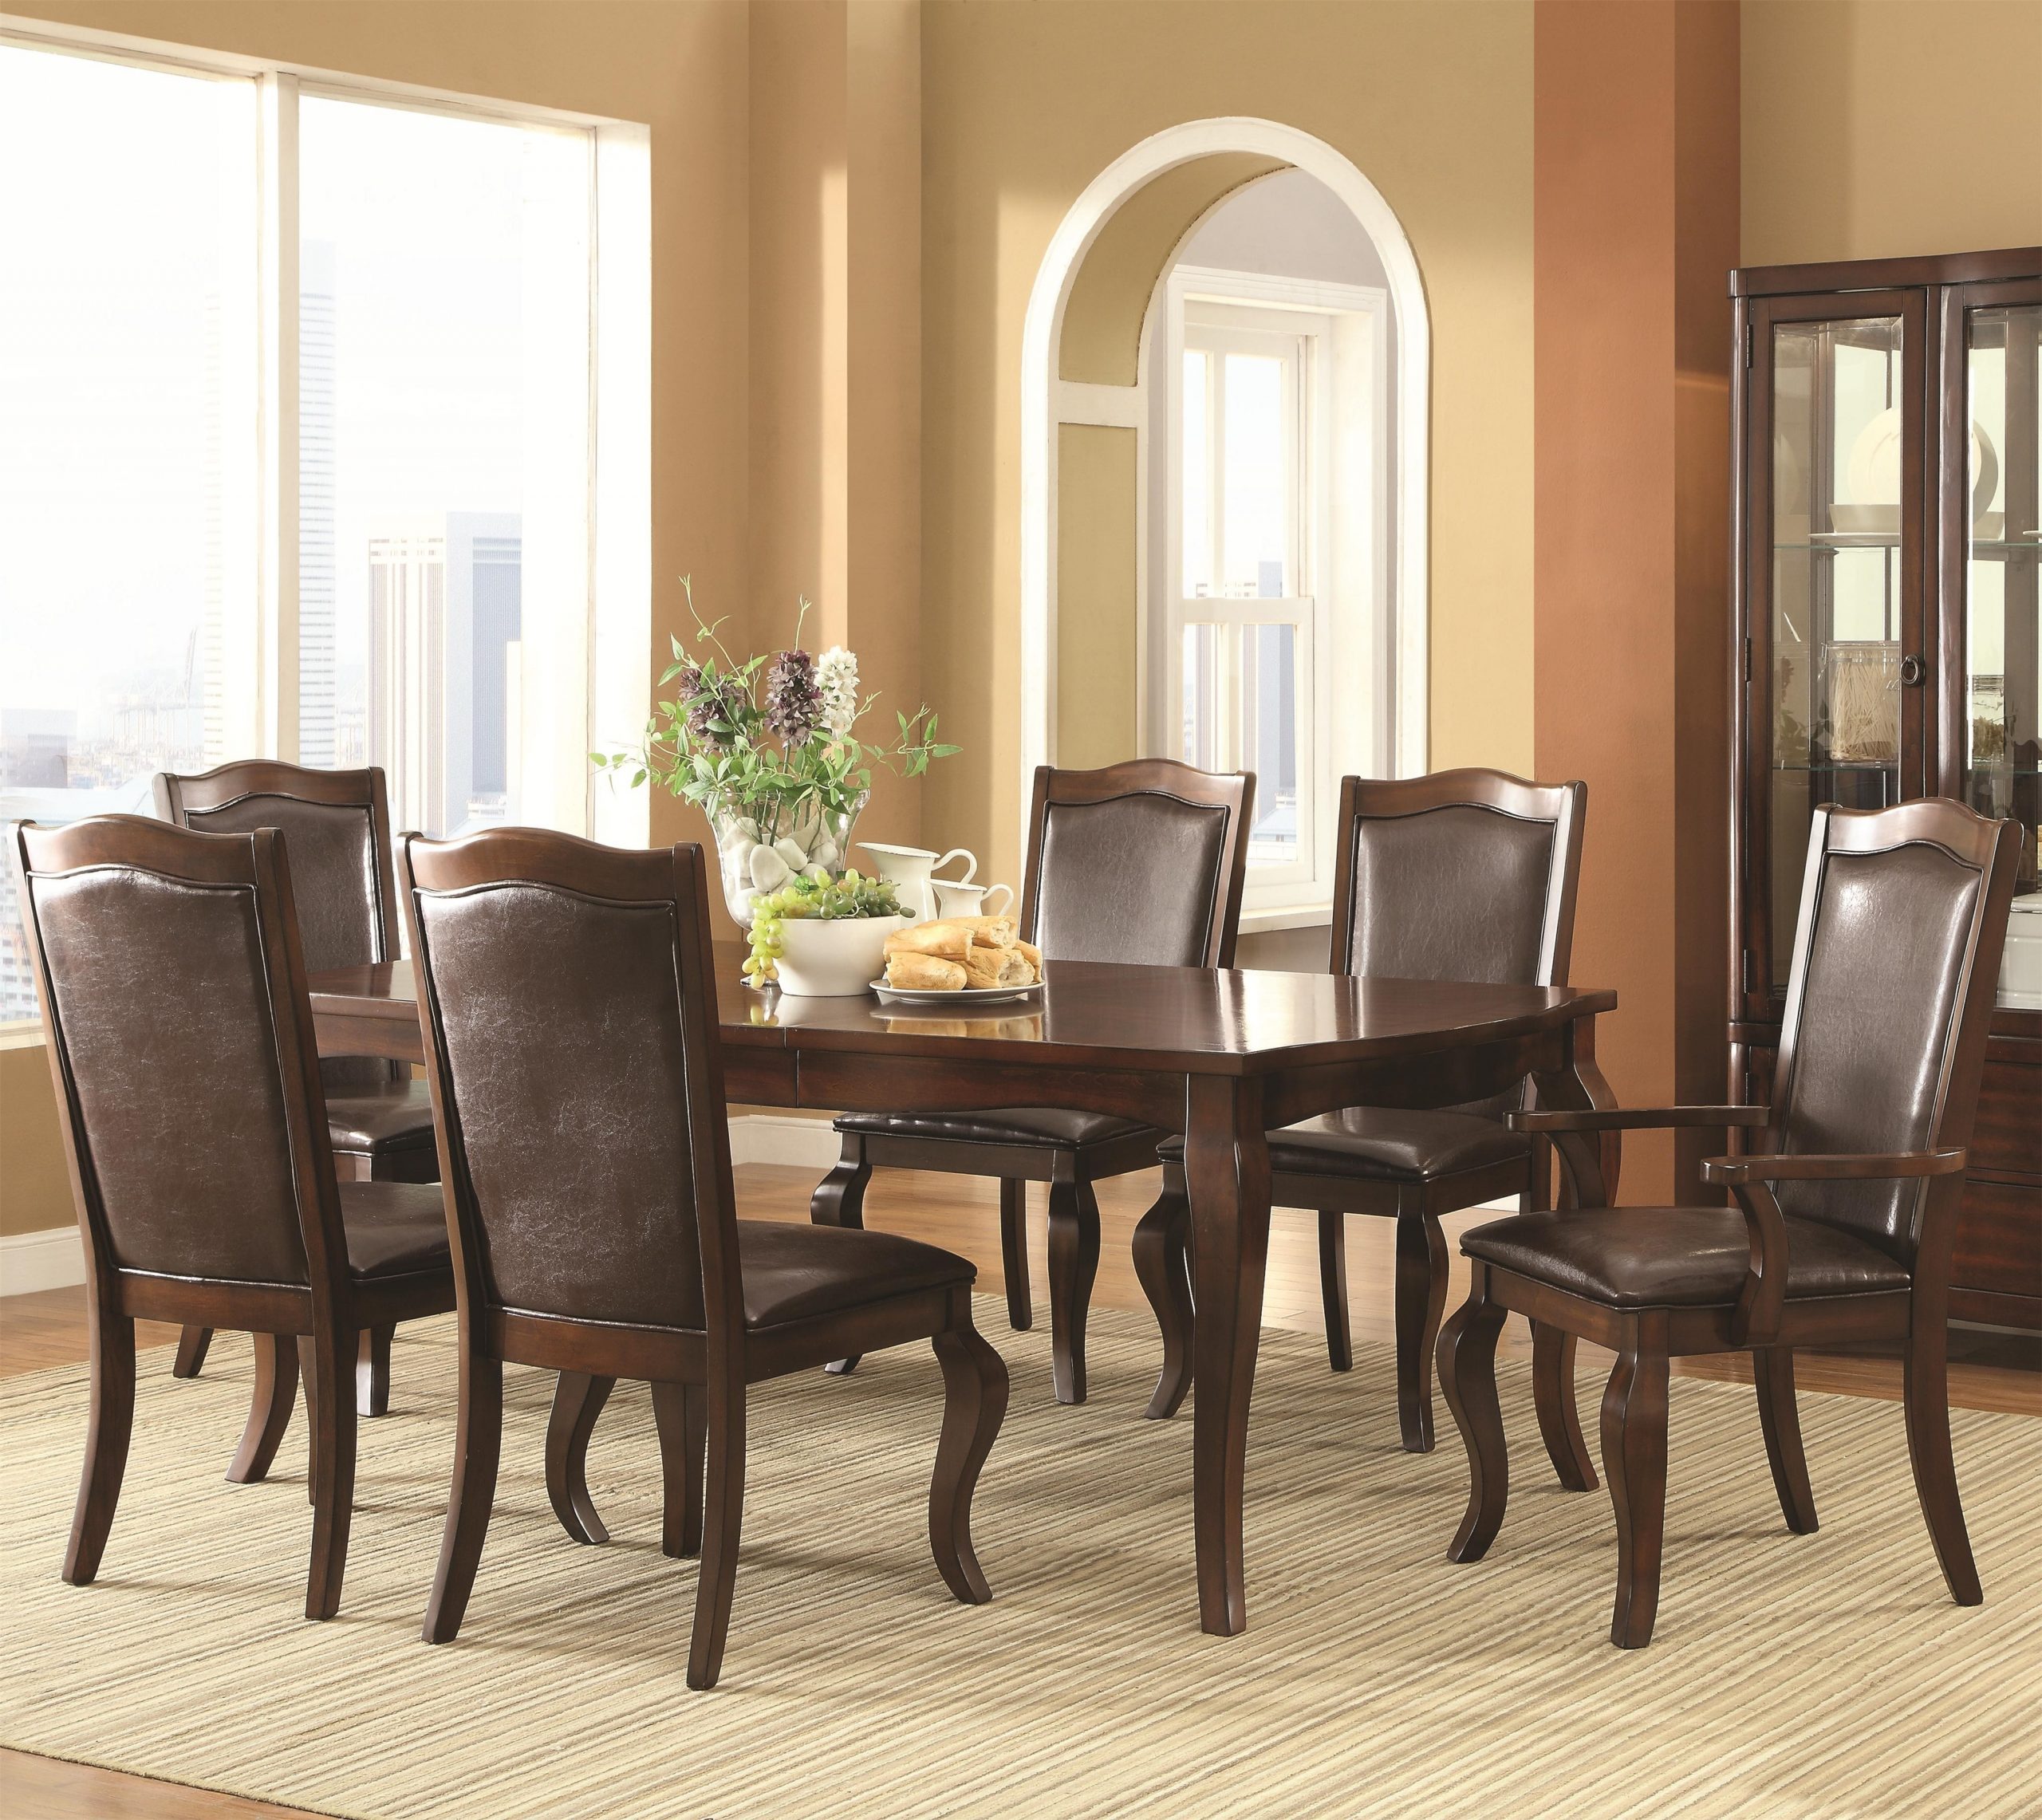 7 Piece Dining Room Table Sets Clearance